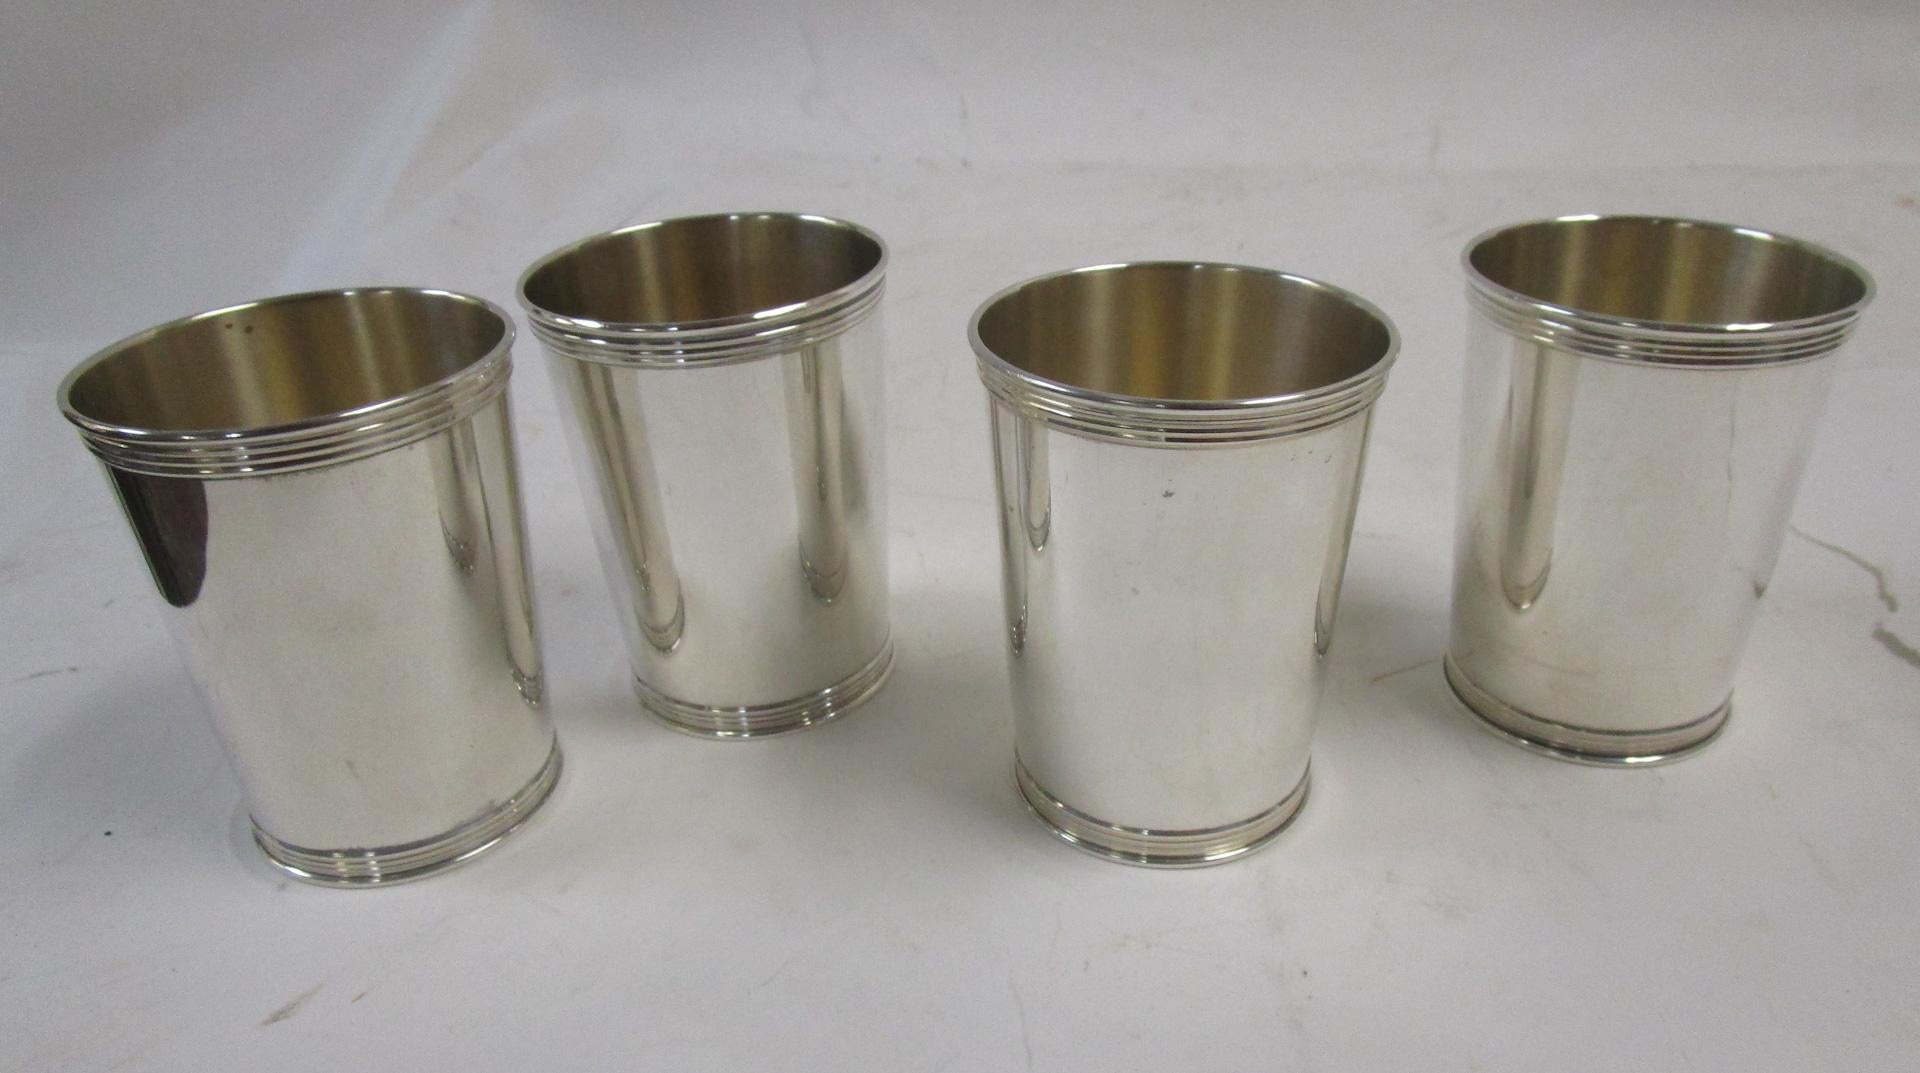 American Manchester Silver Co. Set of 4 Mint Julep Cups, Mid-20th Century